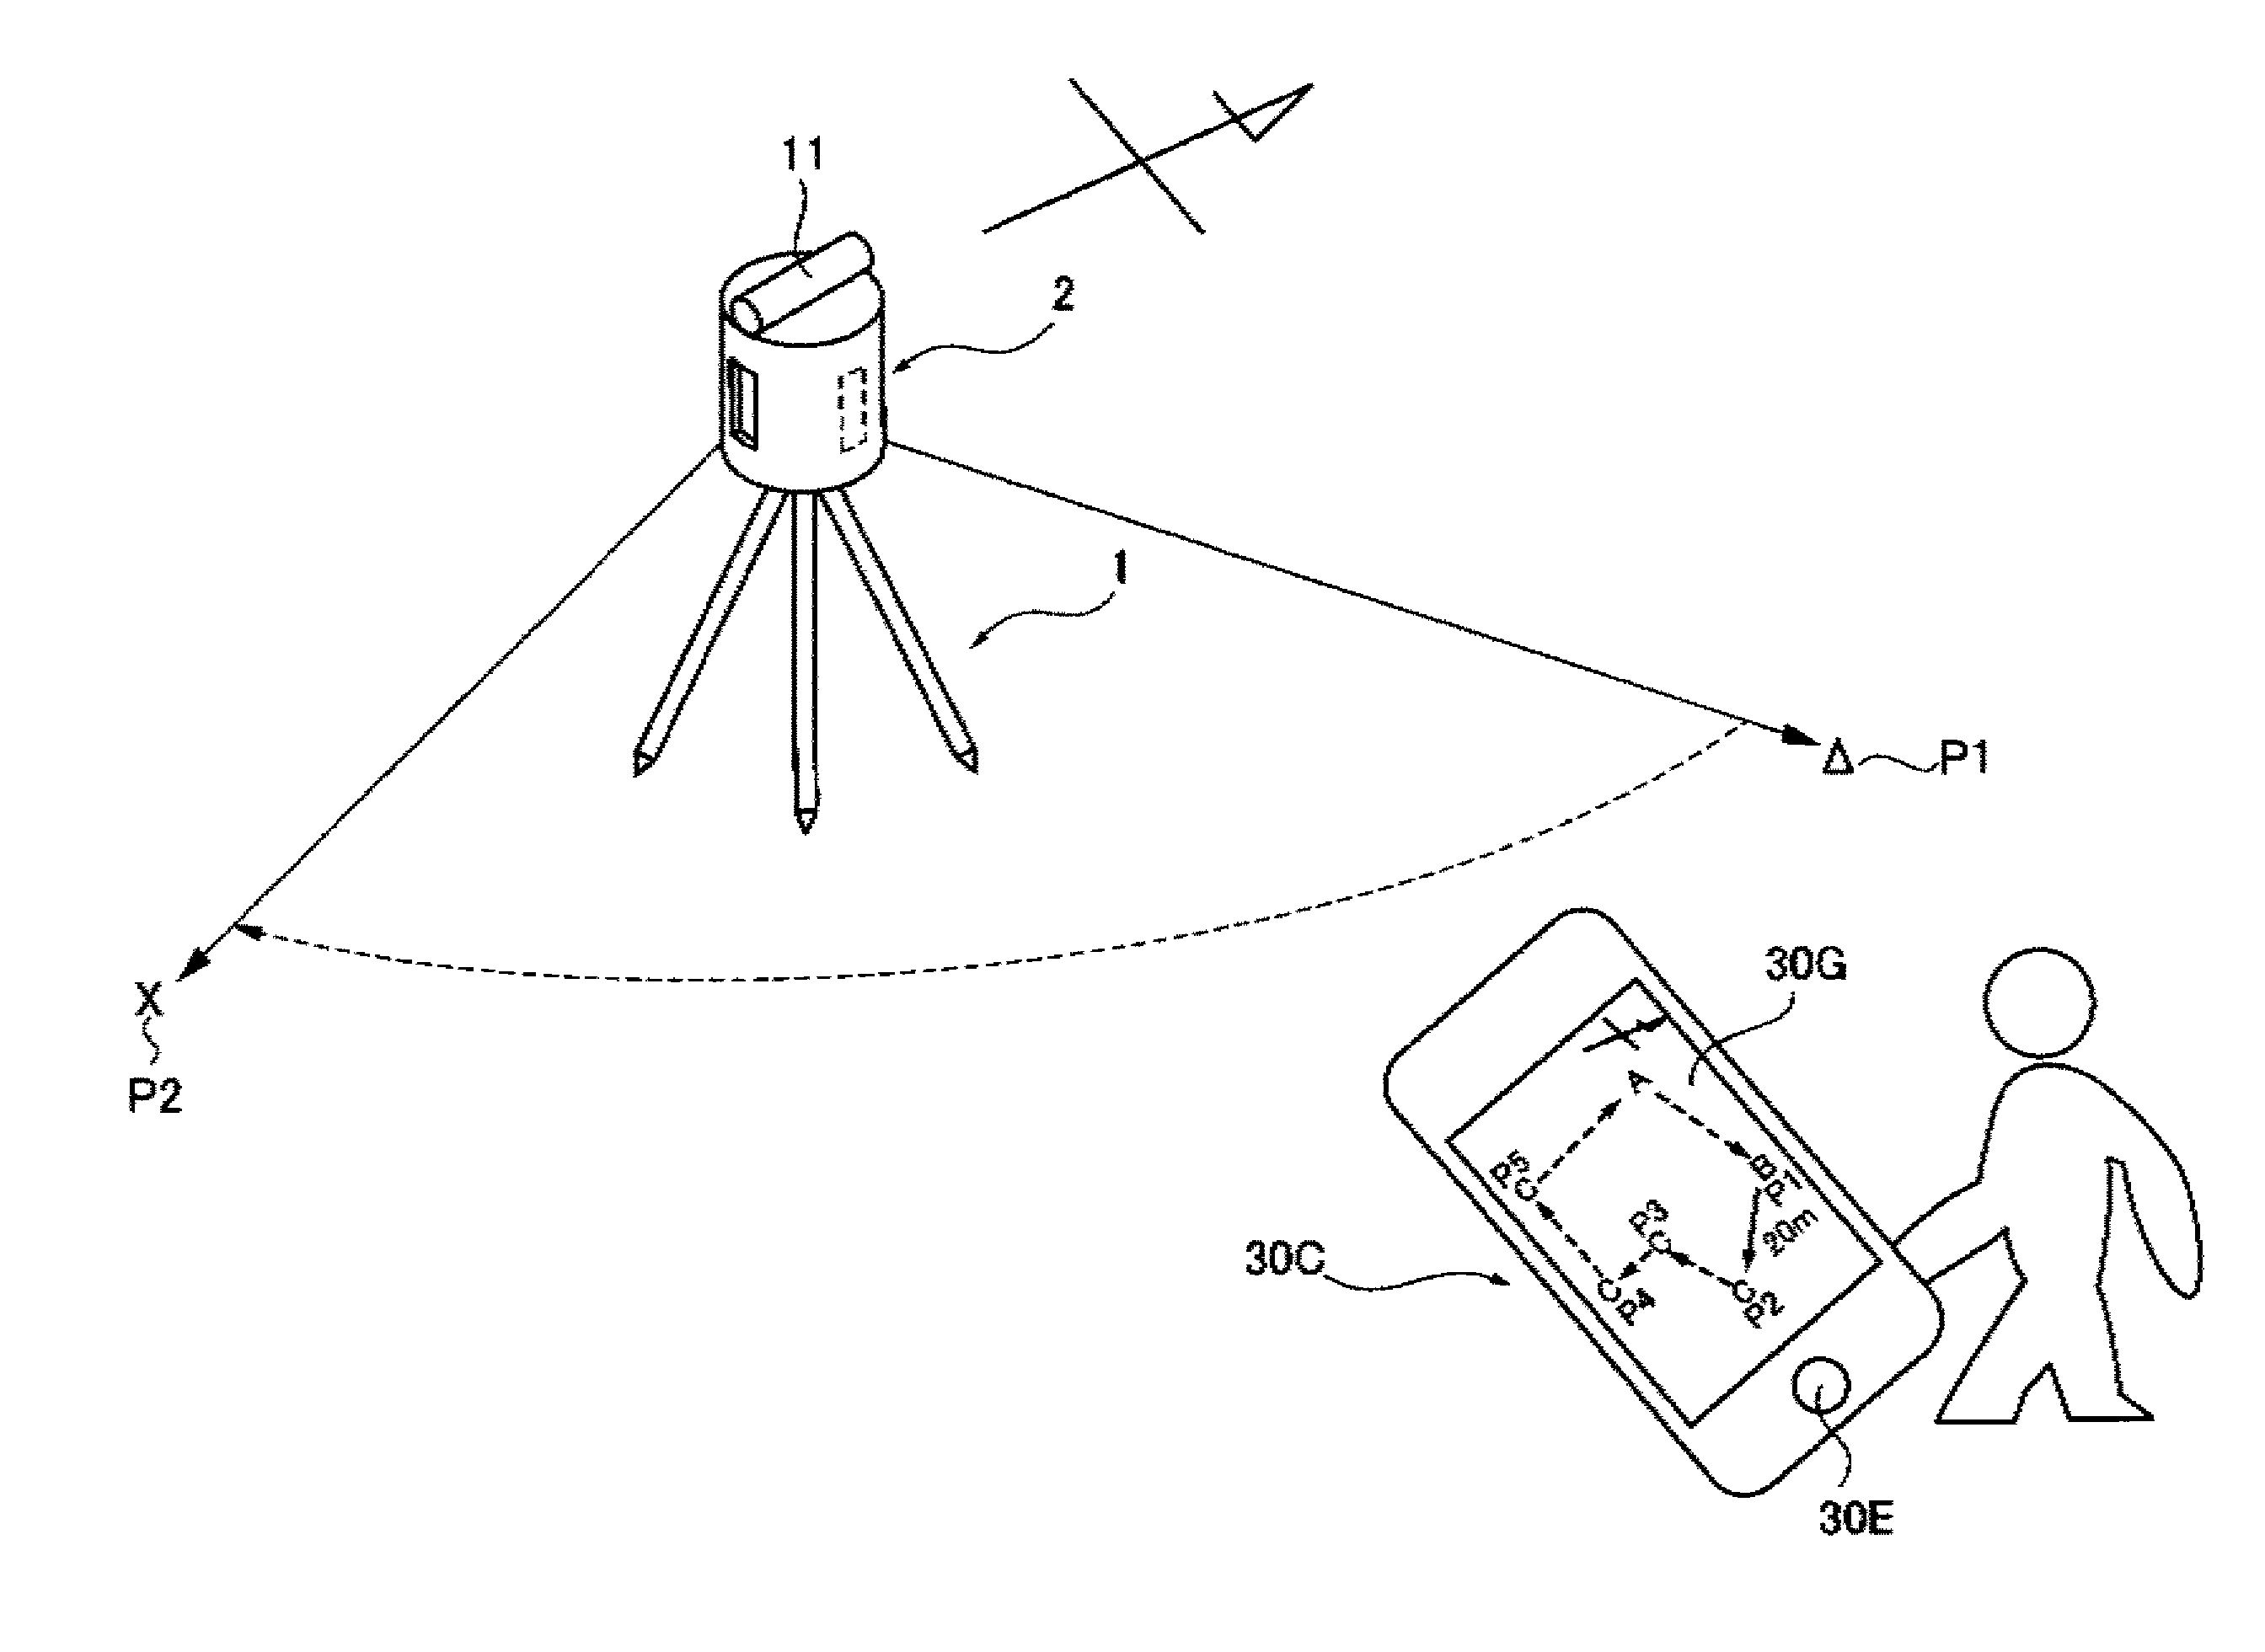 Guide light device, survey apparatus having the guide light device, survey system using the survey apparatus, survey pole used in the survey system, and mobile wireless transceiver used in the survey system